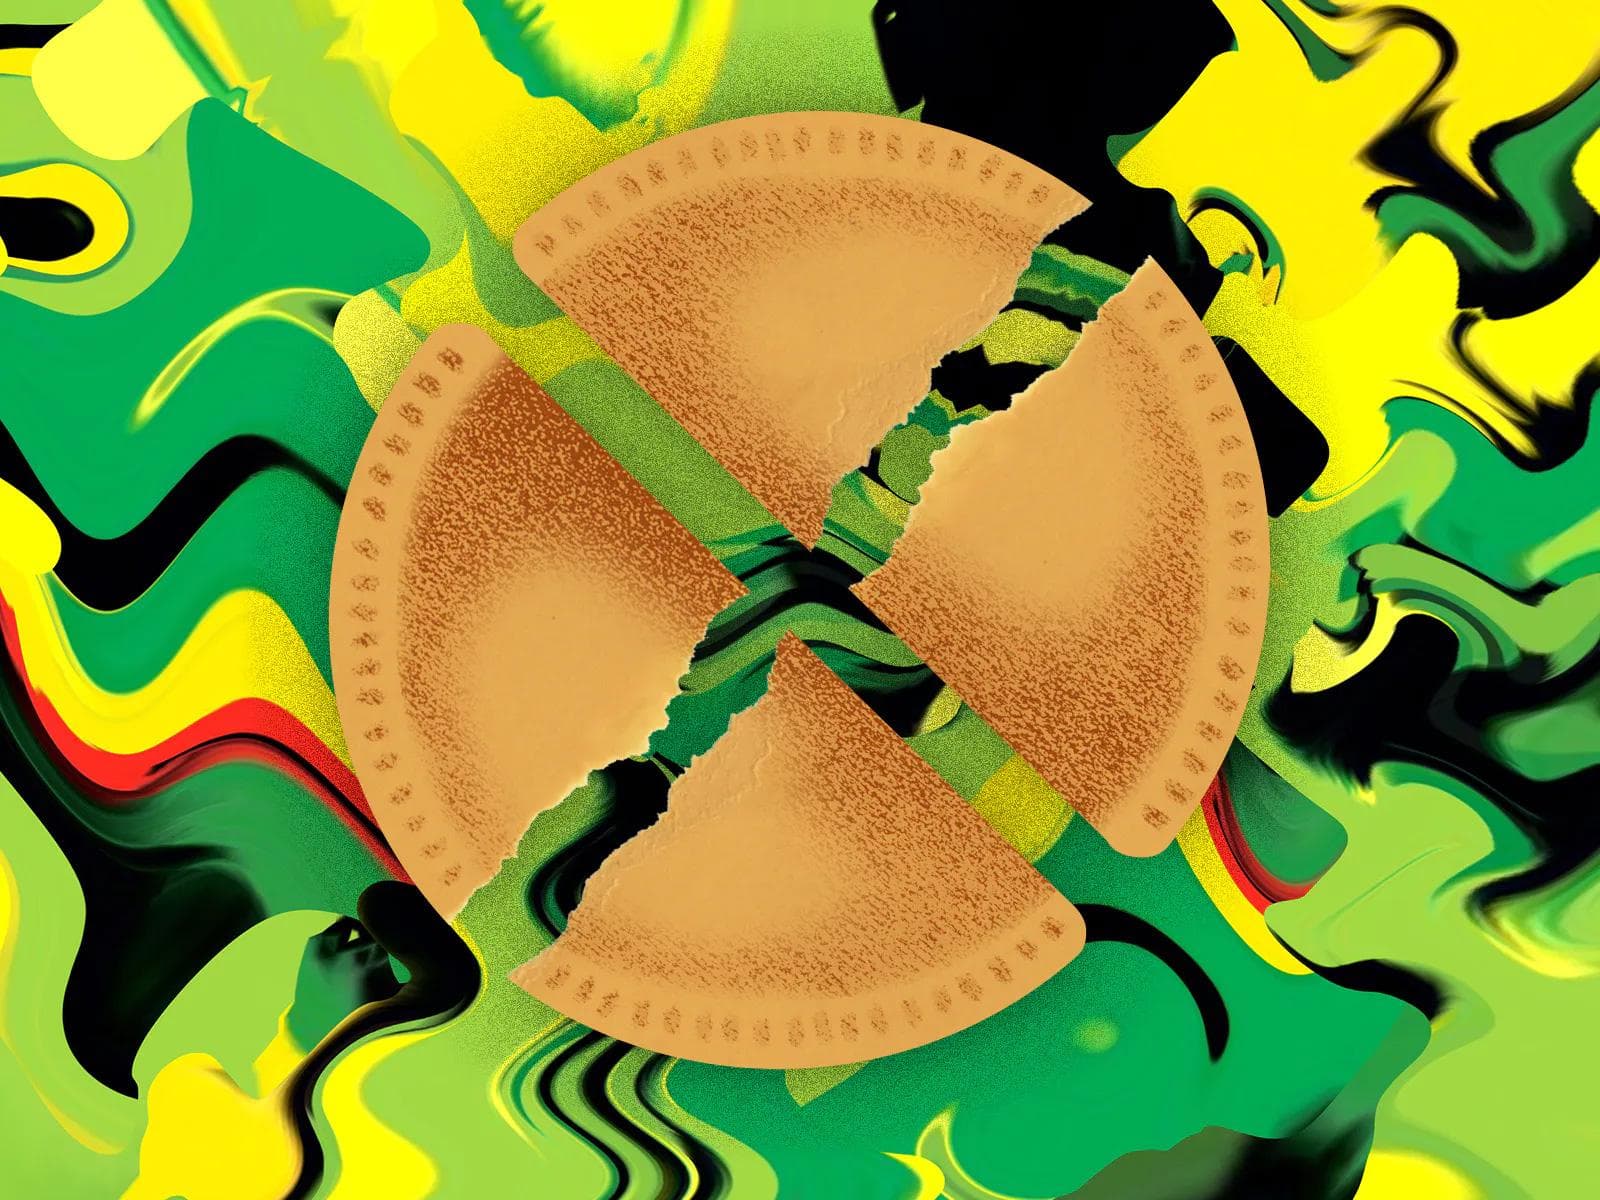 illustration of two splt Jamaican beef patties with an abstract swirling background in green, yellow and red